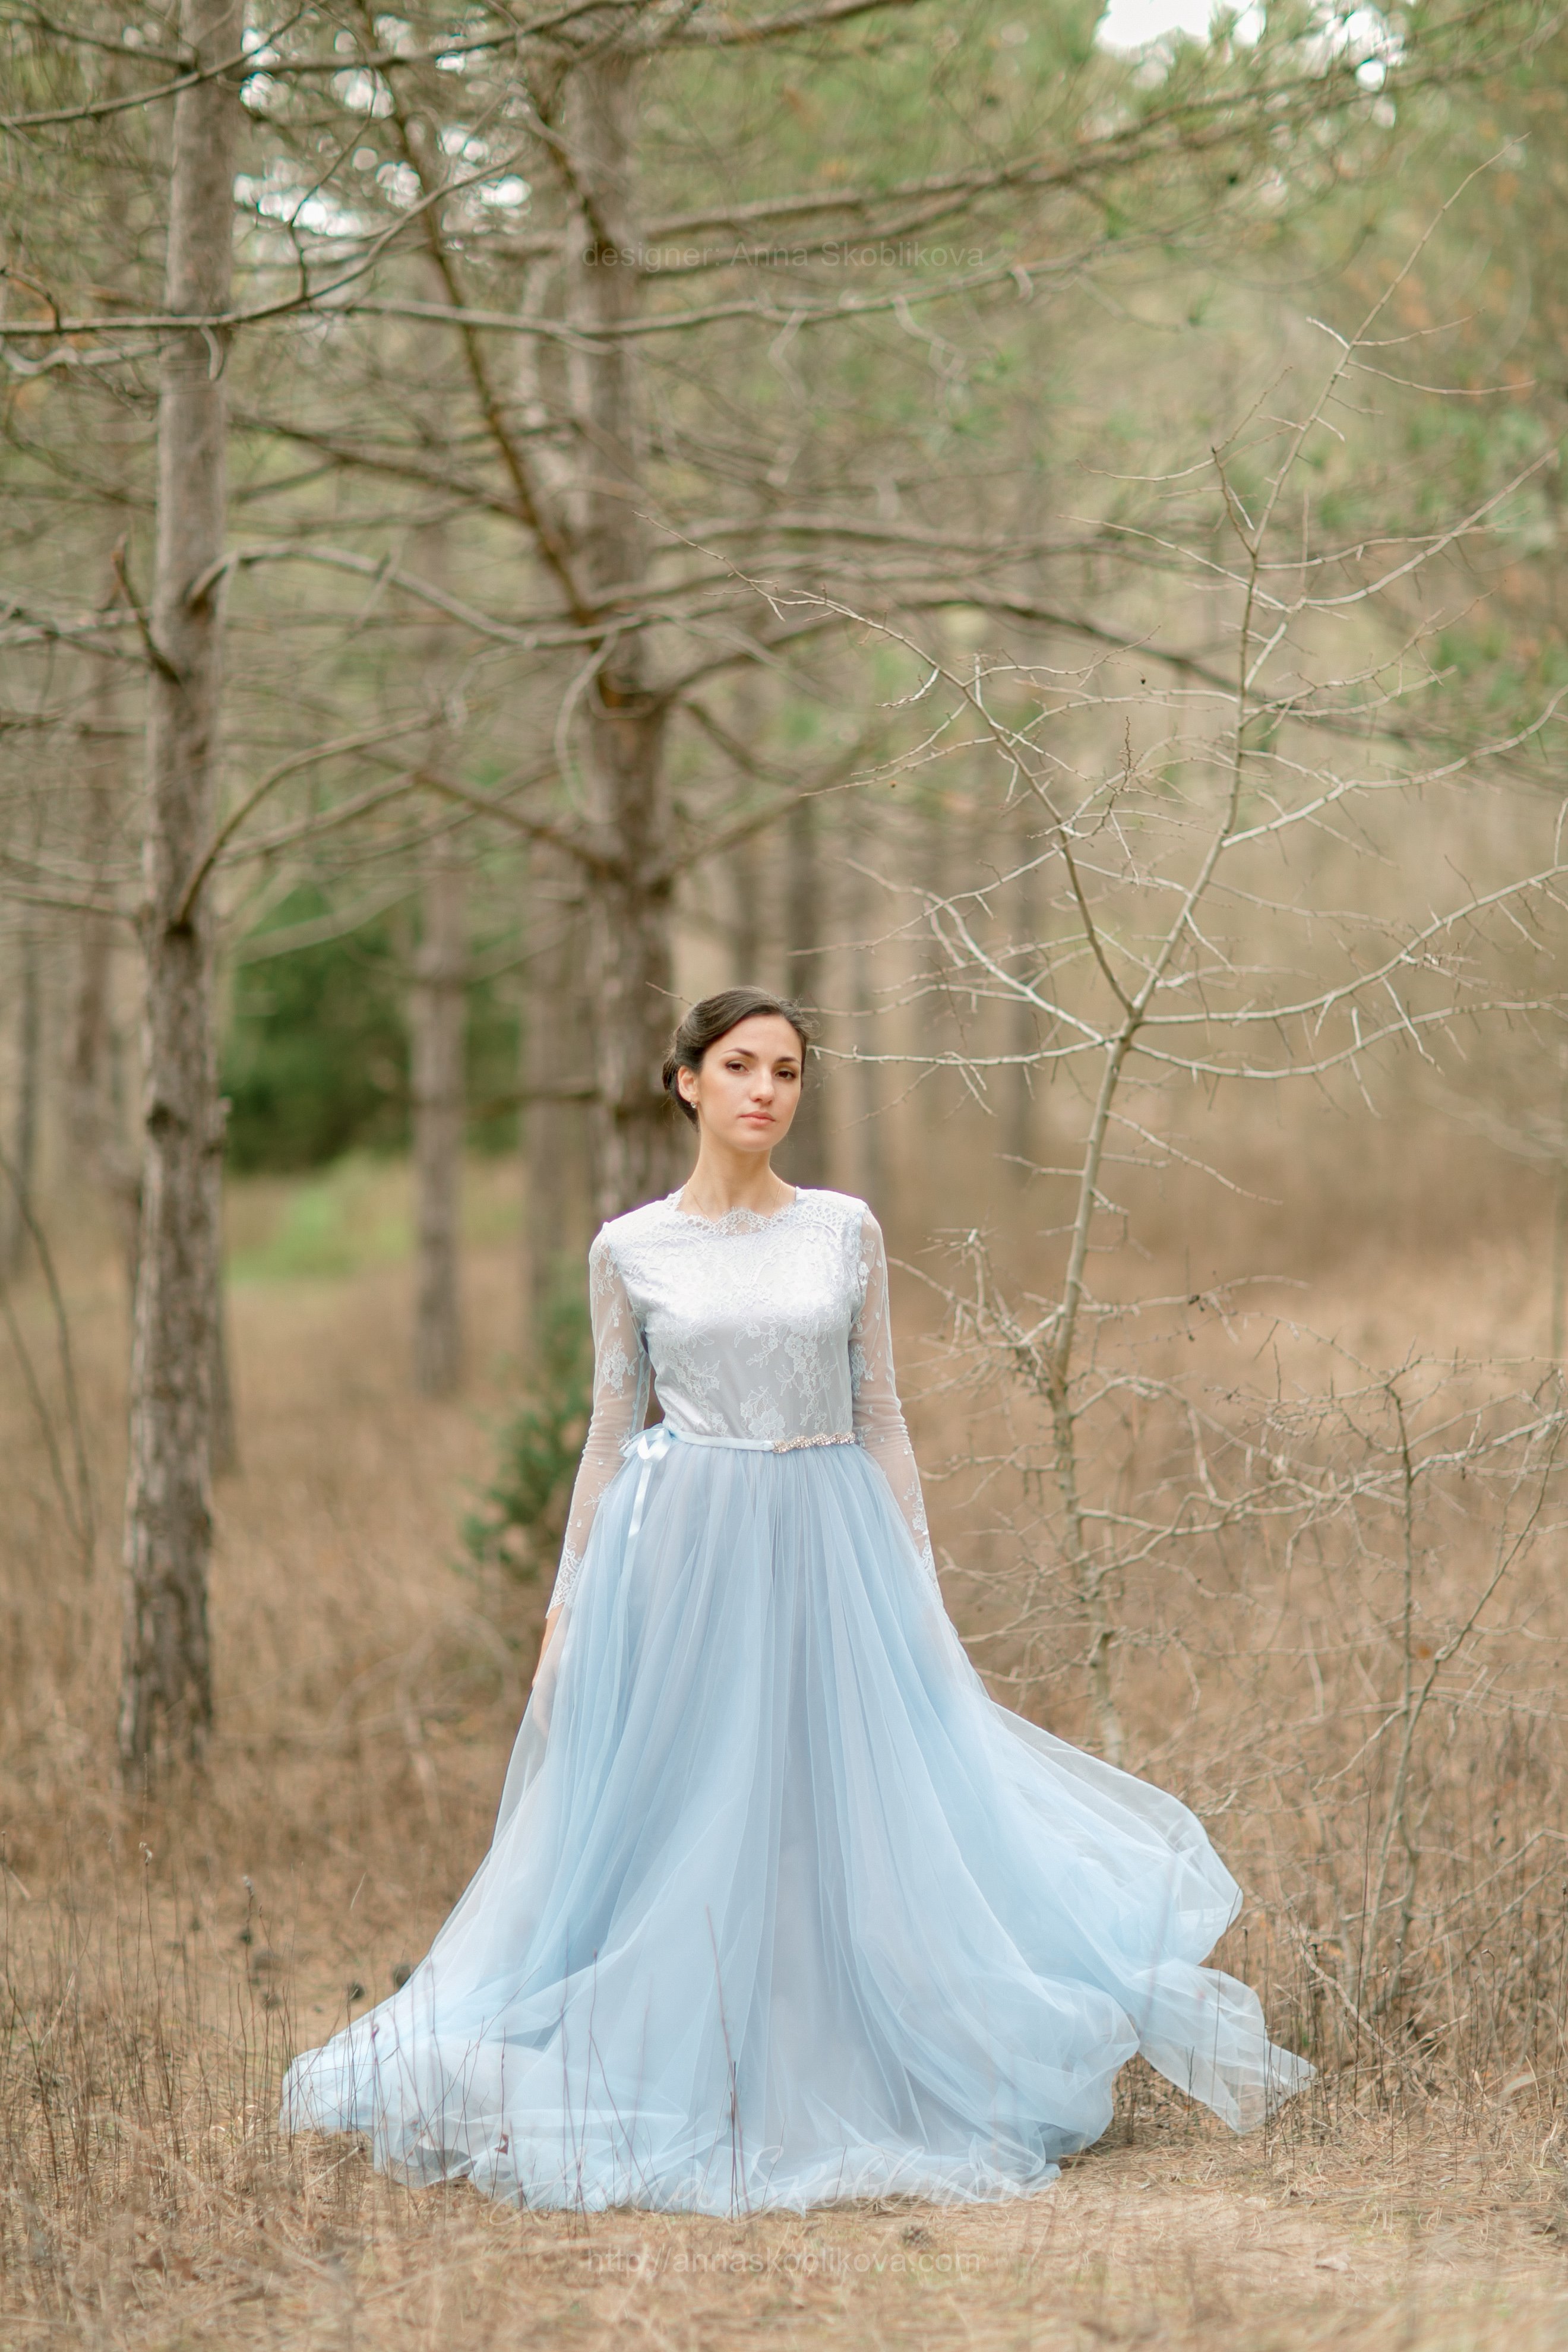 Blue Straps Pleated Tiered Tulle Elegant Prom Wedding Dress